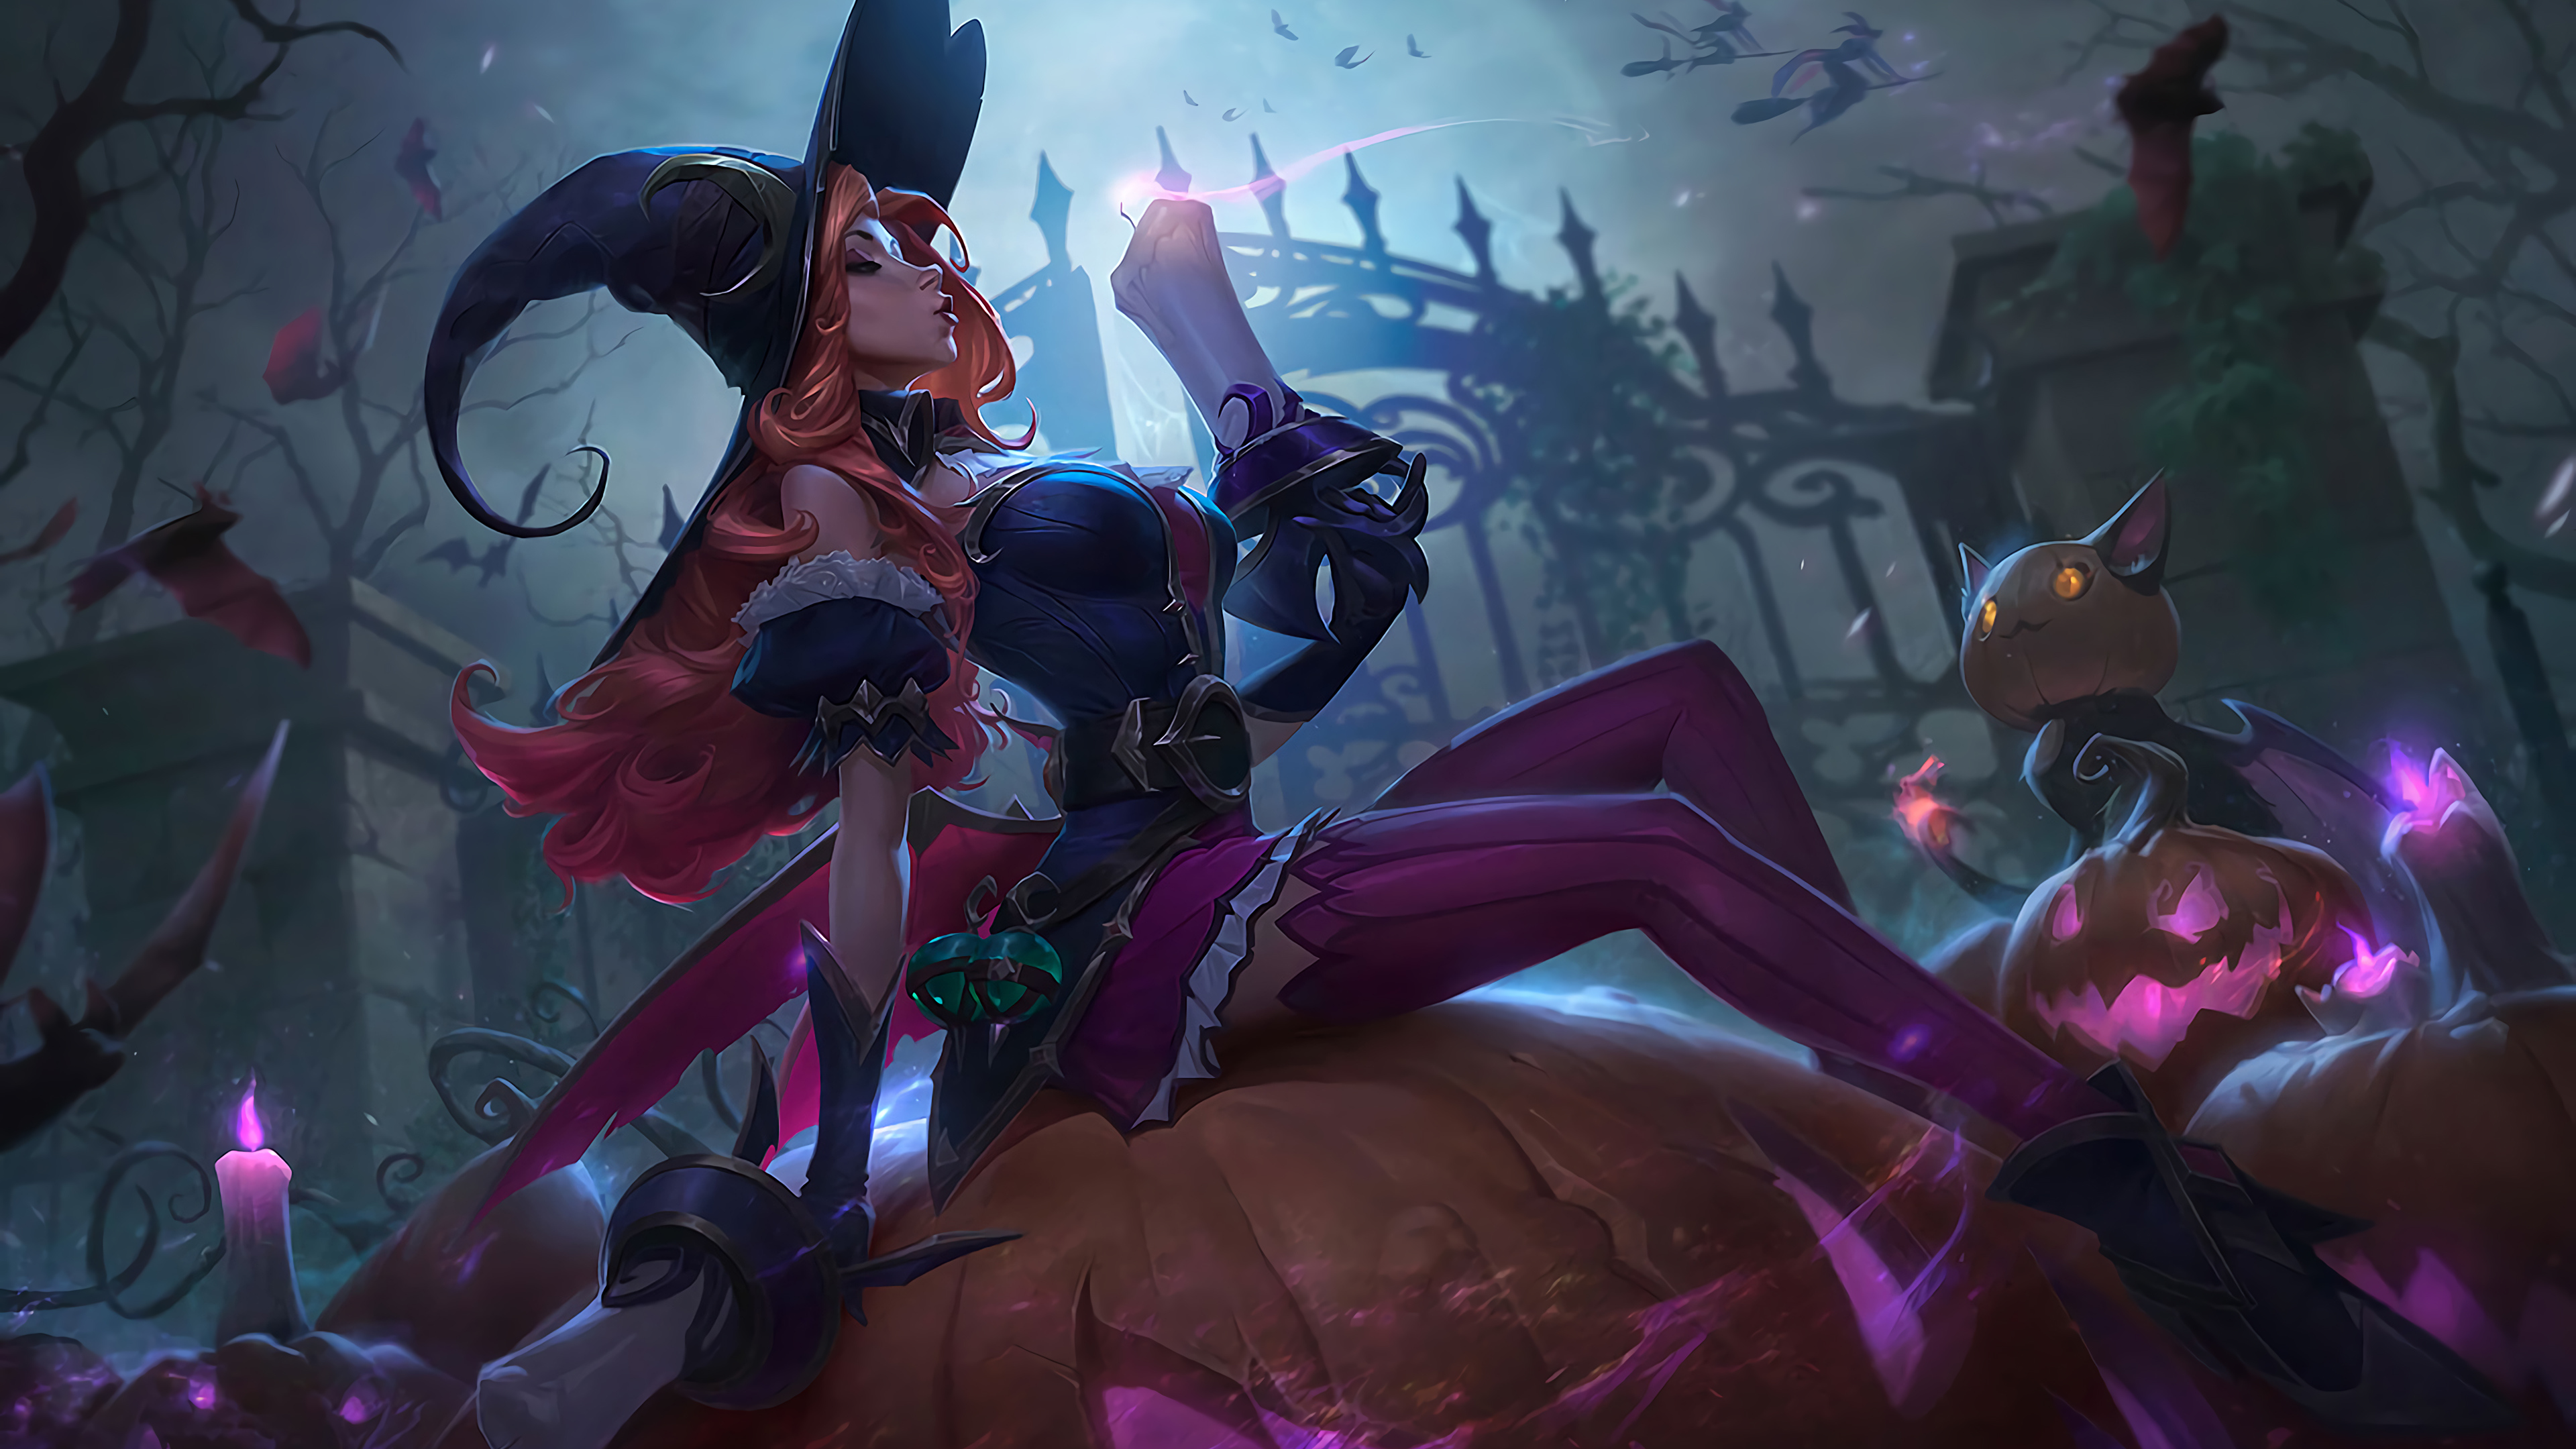 General 3840x2160 Miss Fortune (League of Legends) League of Legends Riot Games Halloween witch witch hat Jack O' Lantern witch's broom bats stockings GZG PC gaming video game girls fantasy art fantasy girl hat women with hats legs sitting pumpkin